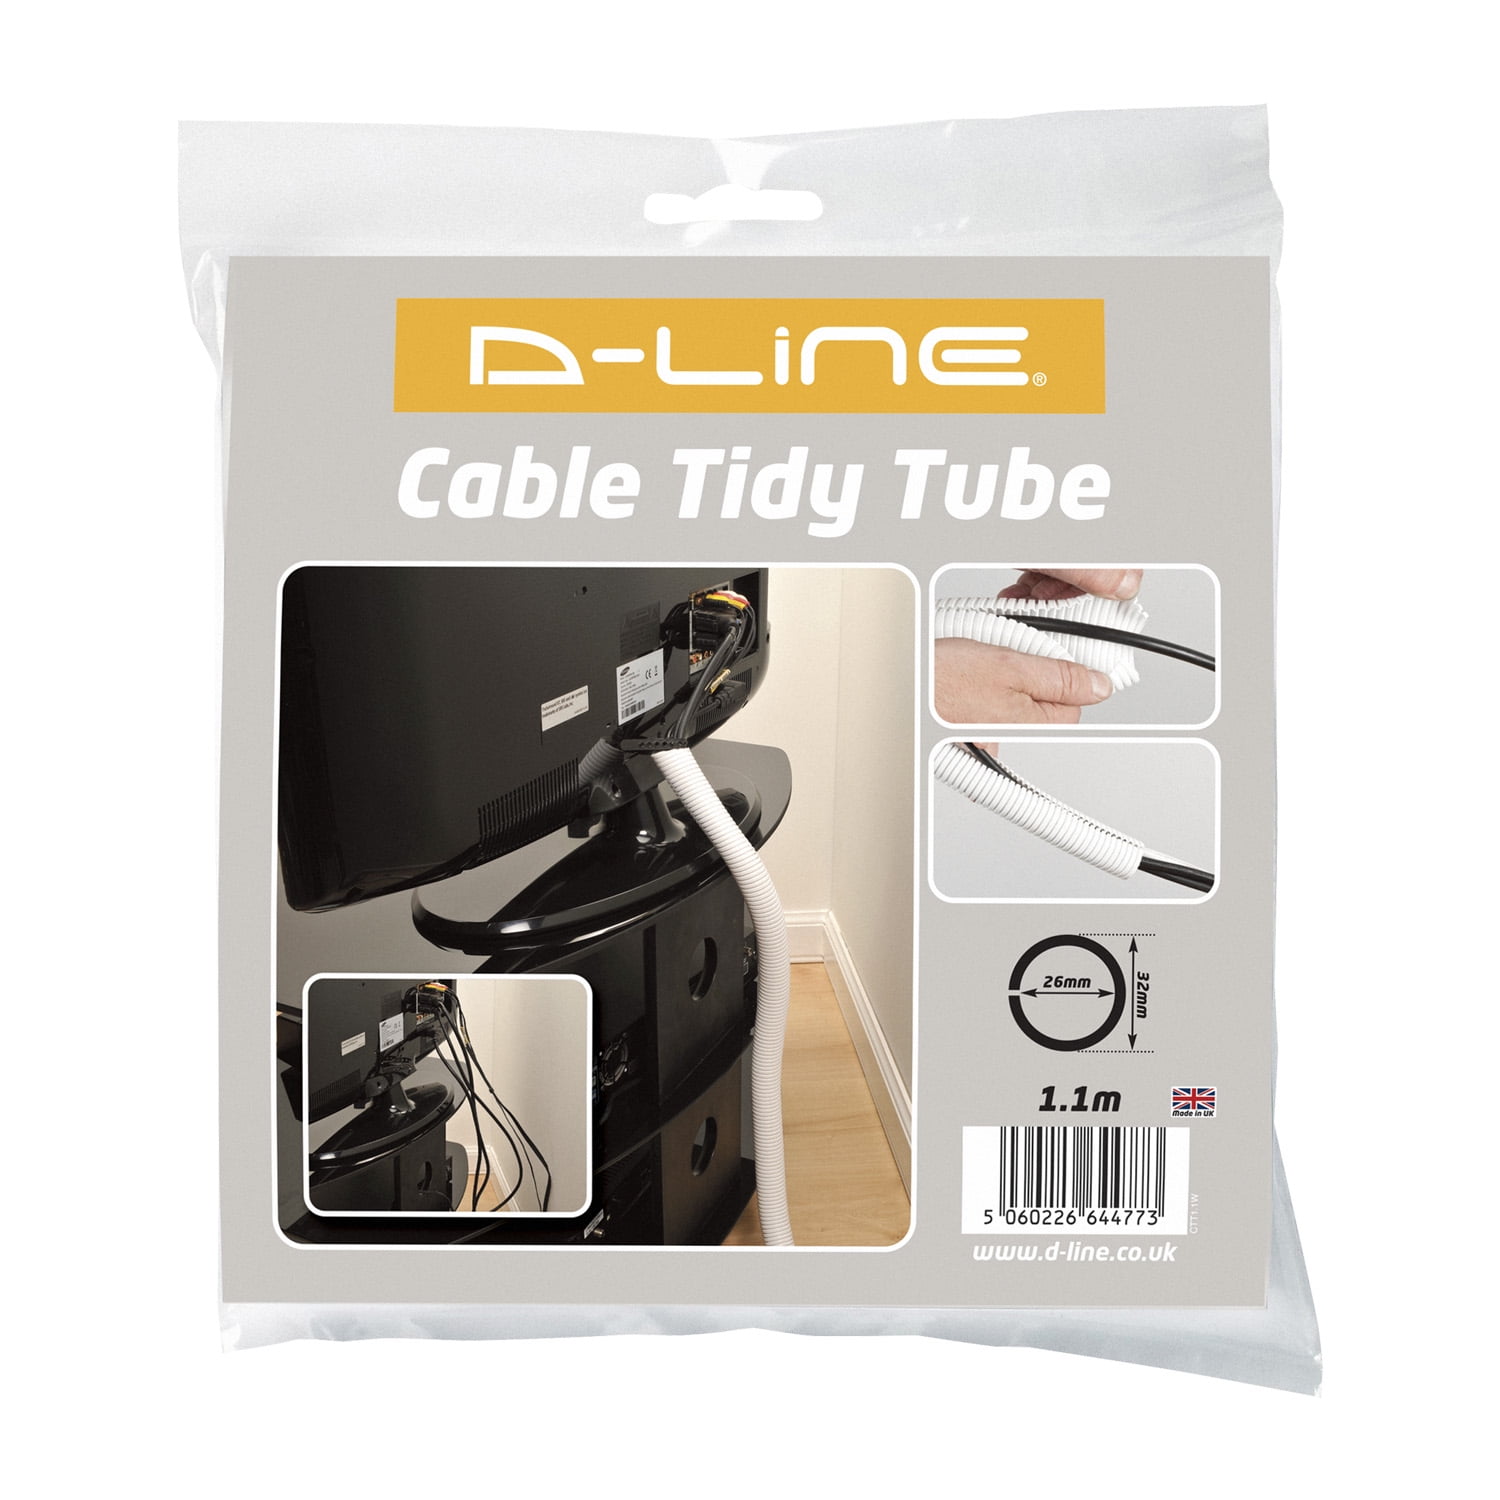 D-Line Small White Cable Management Box and D-Line White Cable Tube Bundle … 